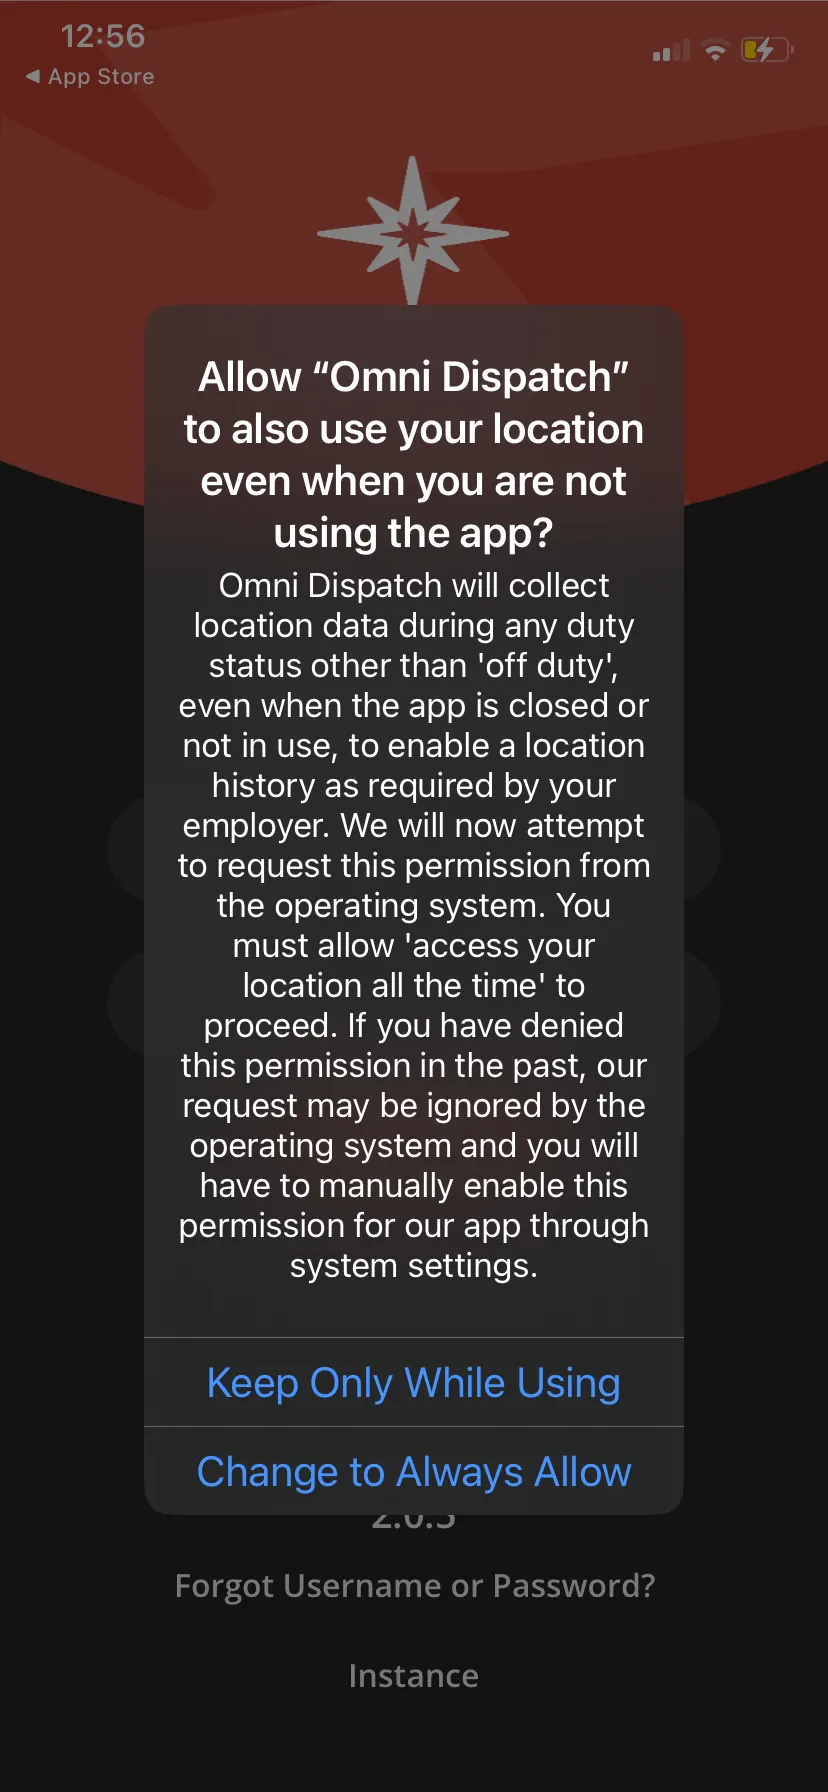 When asked to allow Omni Dispatch to use your location when not using the app, select Change to Always Allow. This is a requirement by Apple and not by Omni Dispatch.